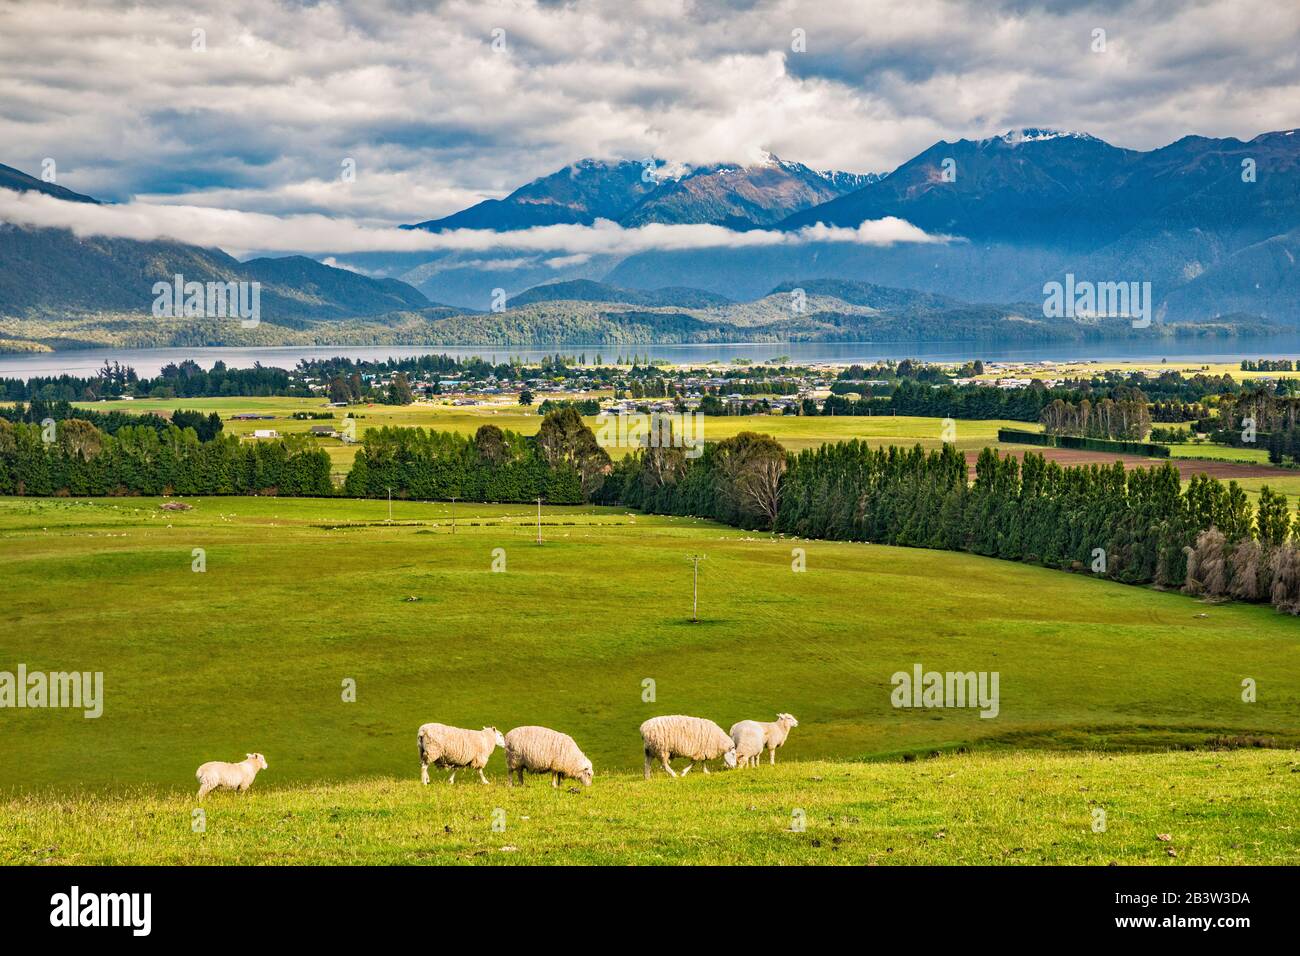 Murchison Mountains, Lake Te Anau, Fiordland National Park, sheep grazing, view from Ramparts Road, Southland Region, South Island, New Zealand Stock Photo